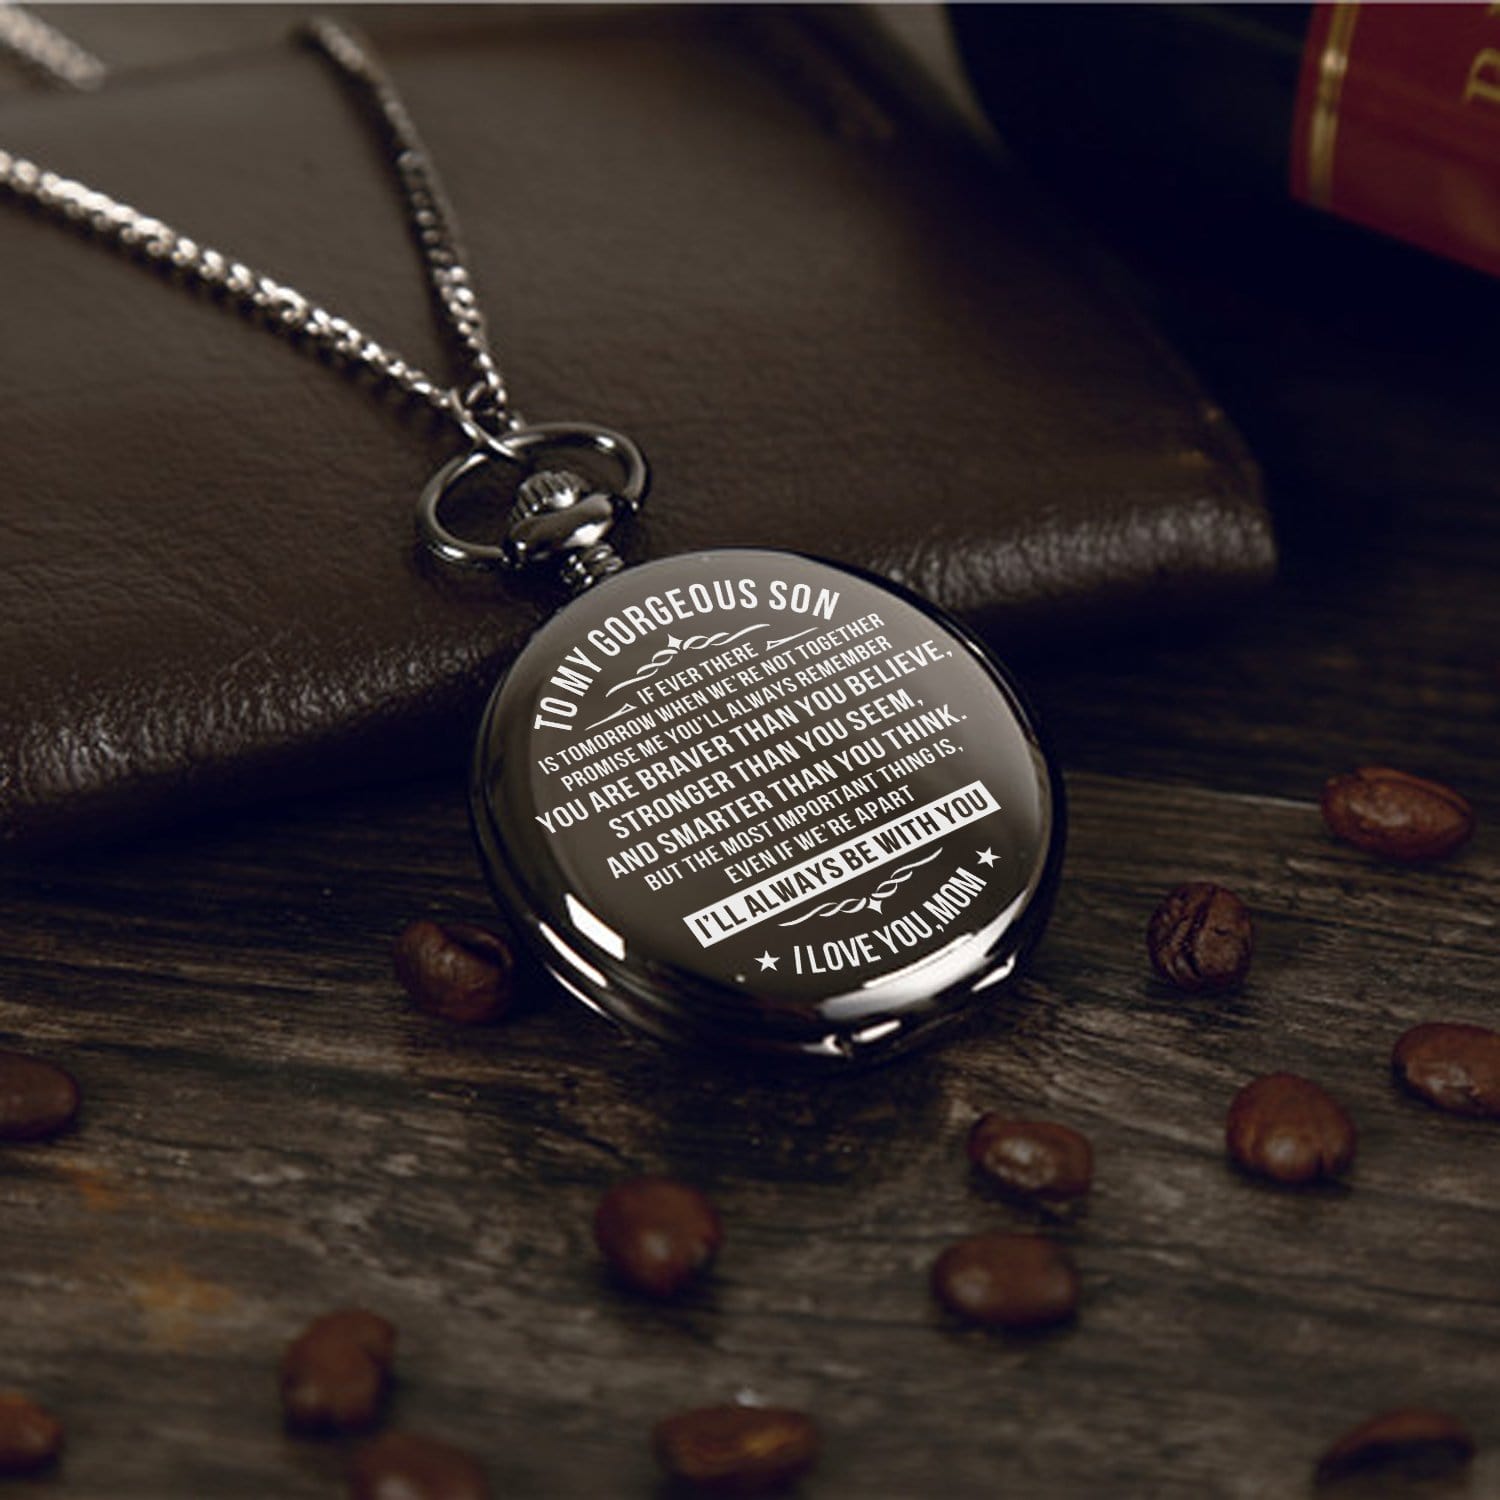 Pocket Watches Mom To Son - I Will Always Be With You Pocket Watch GiveMe-Gifts